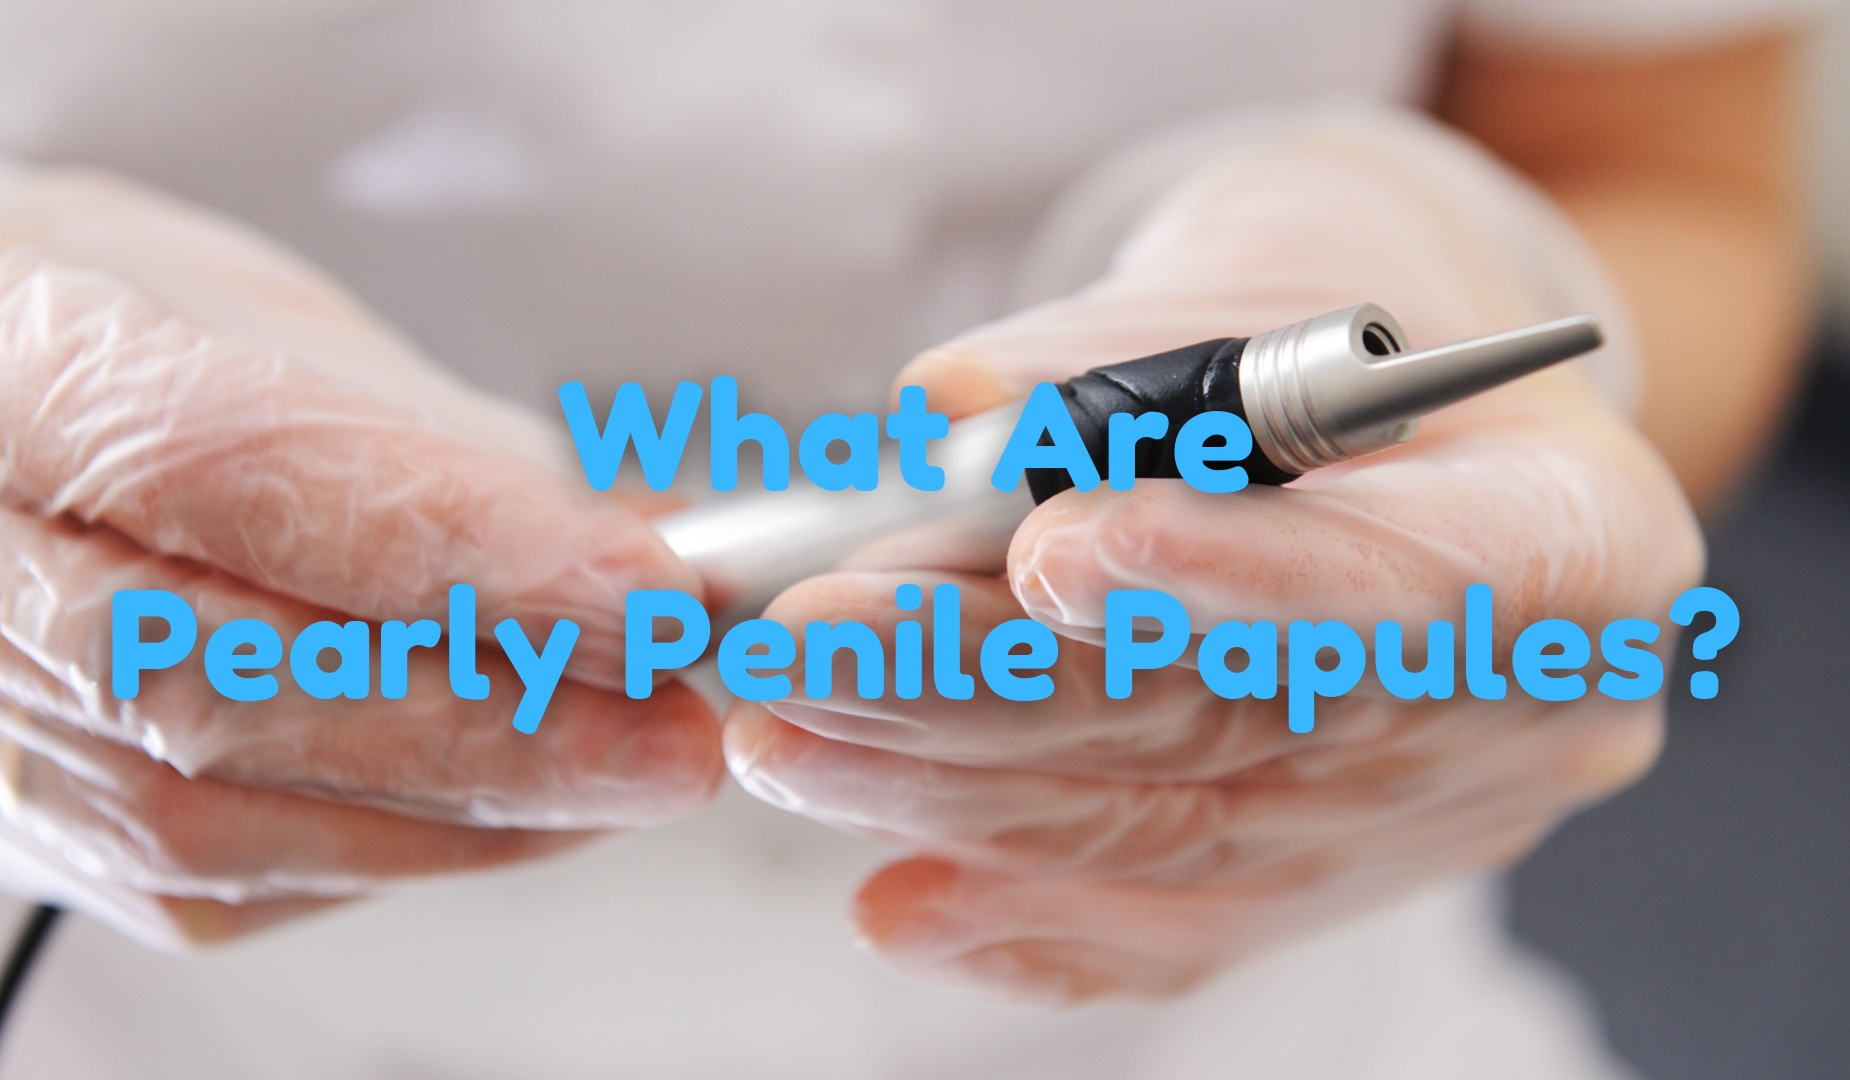 What Are Pearly Penile Papules?